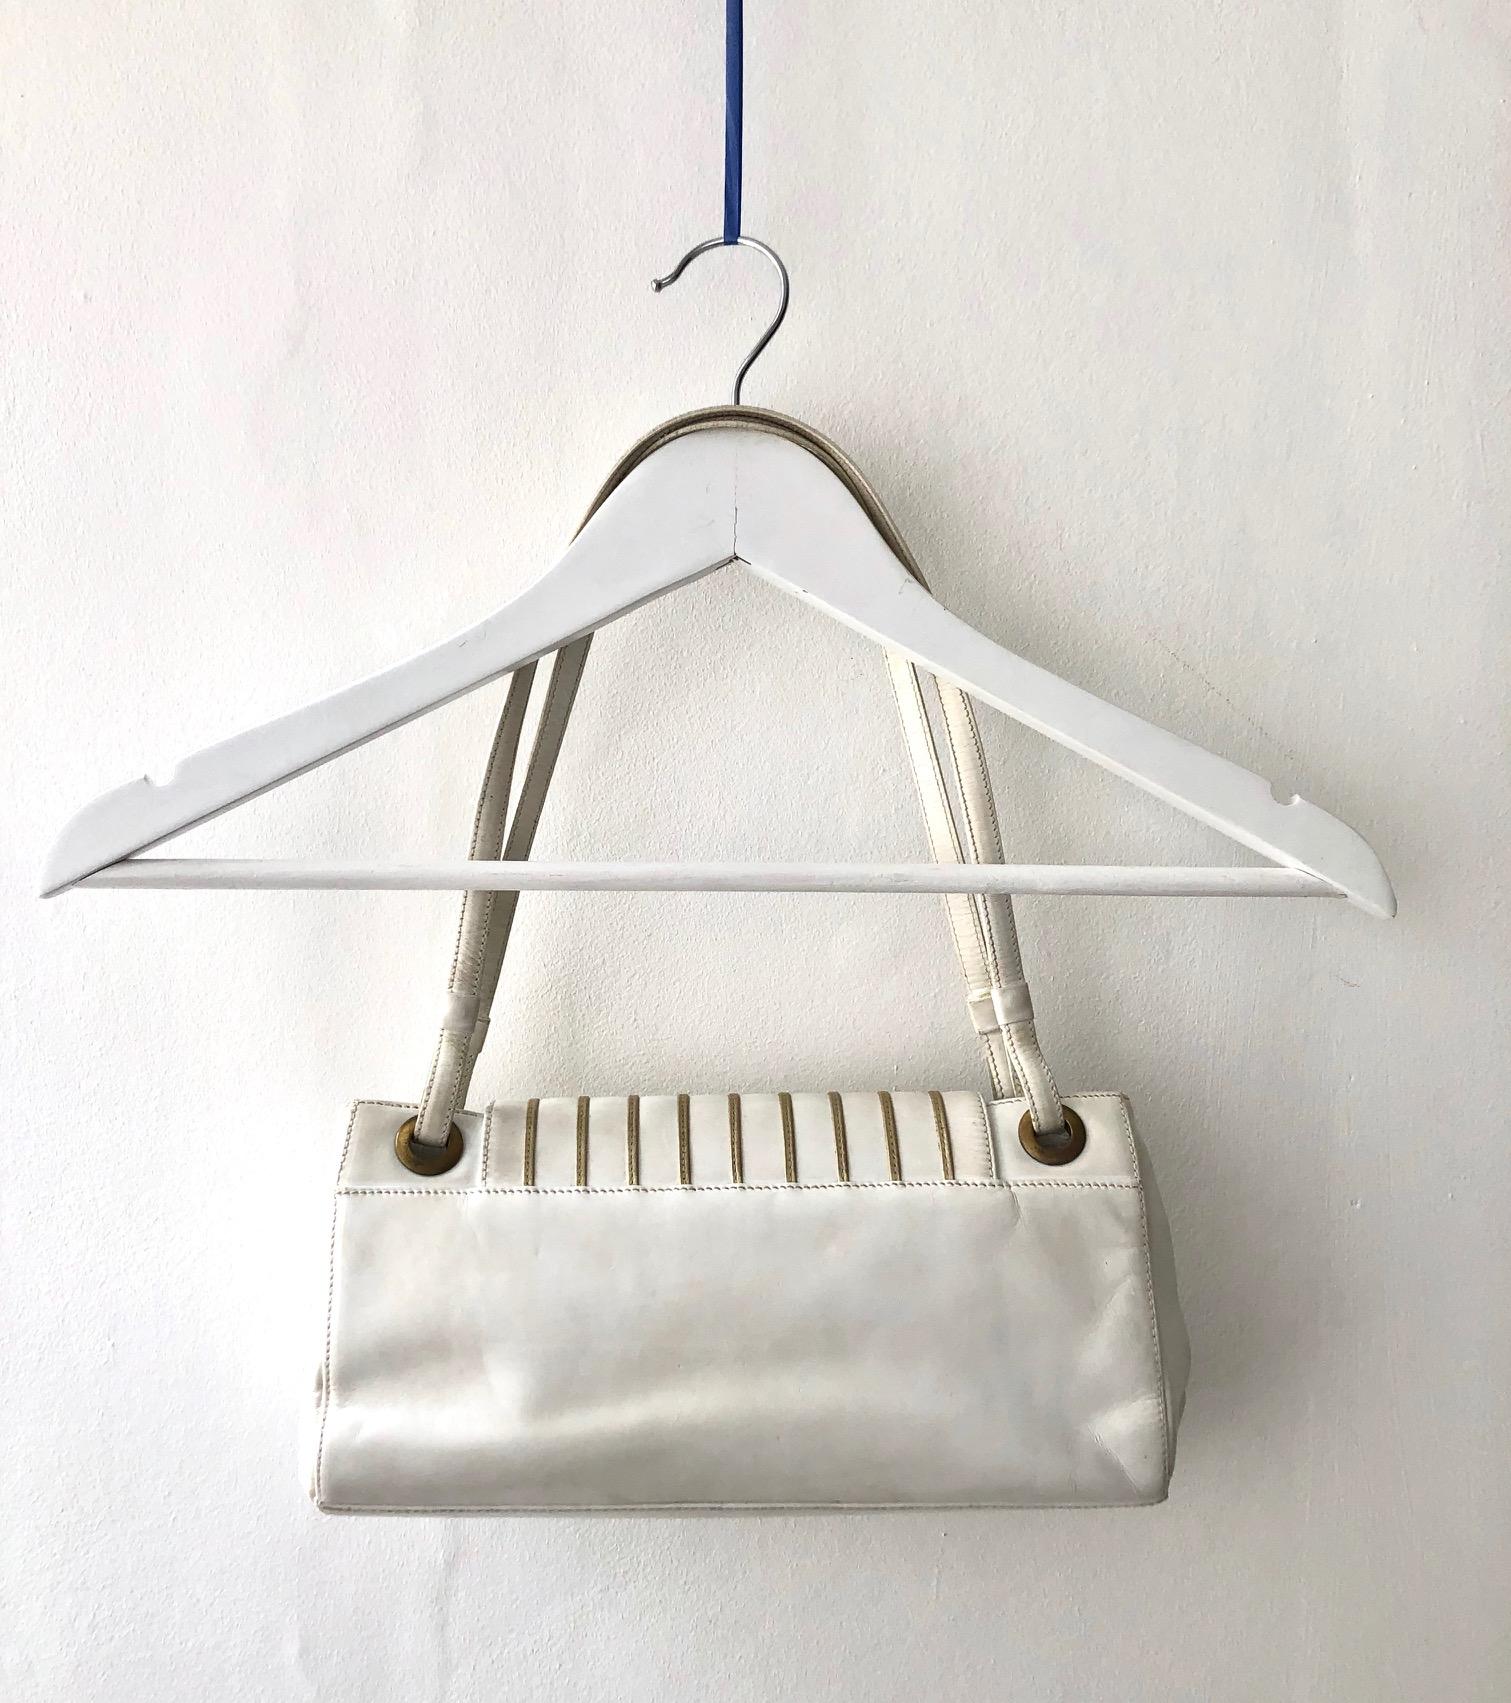 Balmain Paris Handbag White cream Leather, brass metal ware, strong magnetic clasp closure, inside zipped pocket, suede interior This timeless and sophisticated design is crafted from luxurious leather, giving you a stylish and secure accessory that